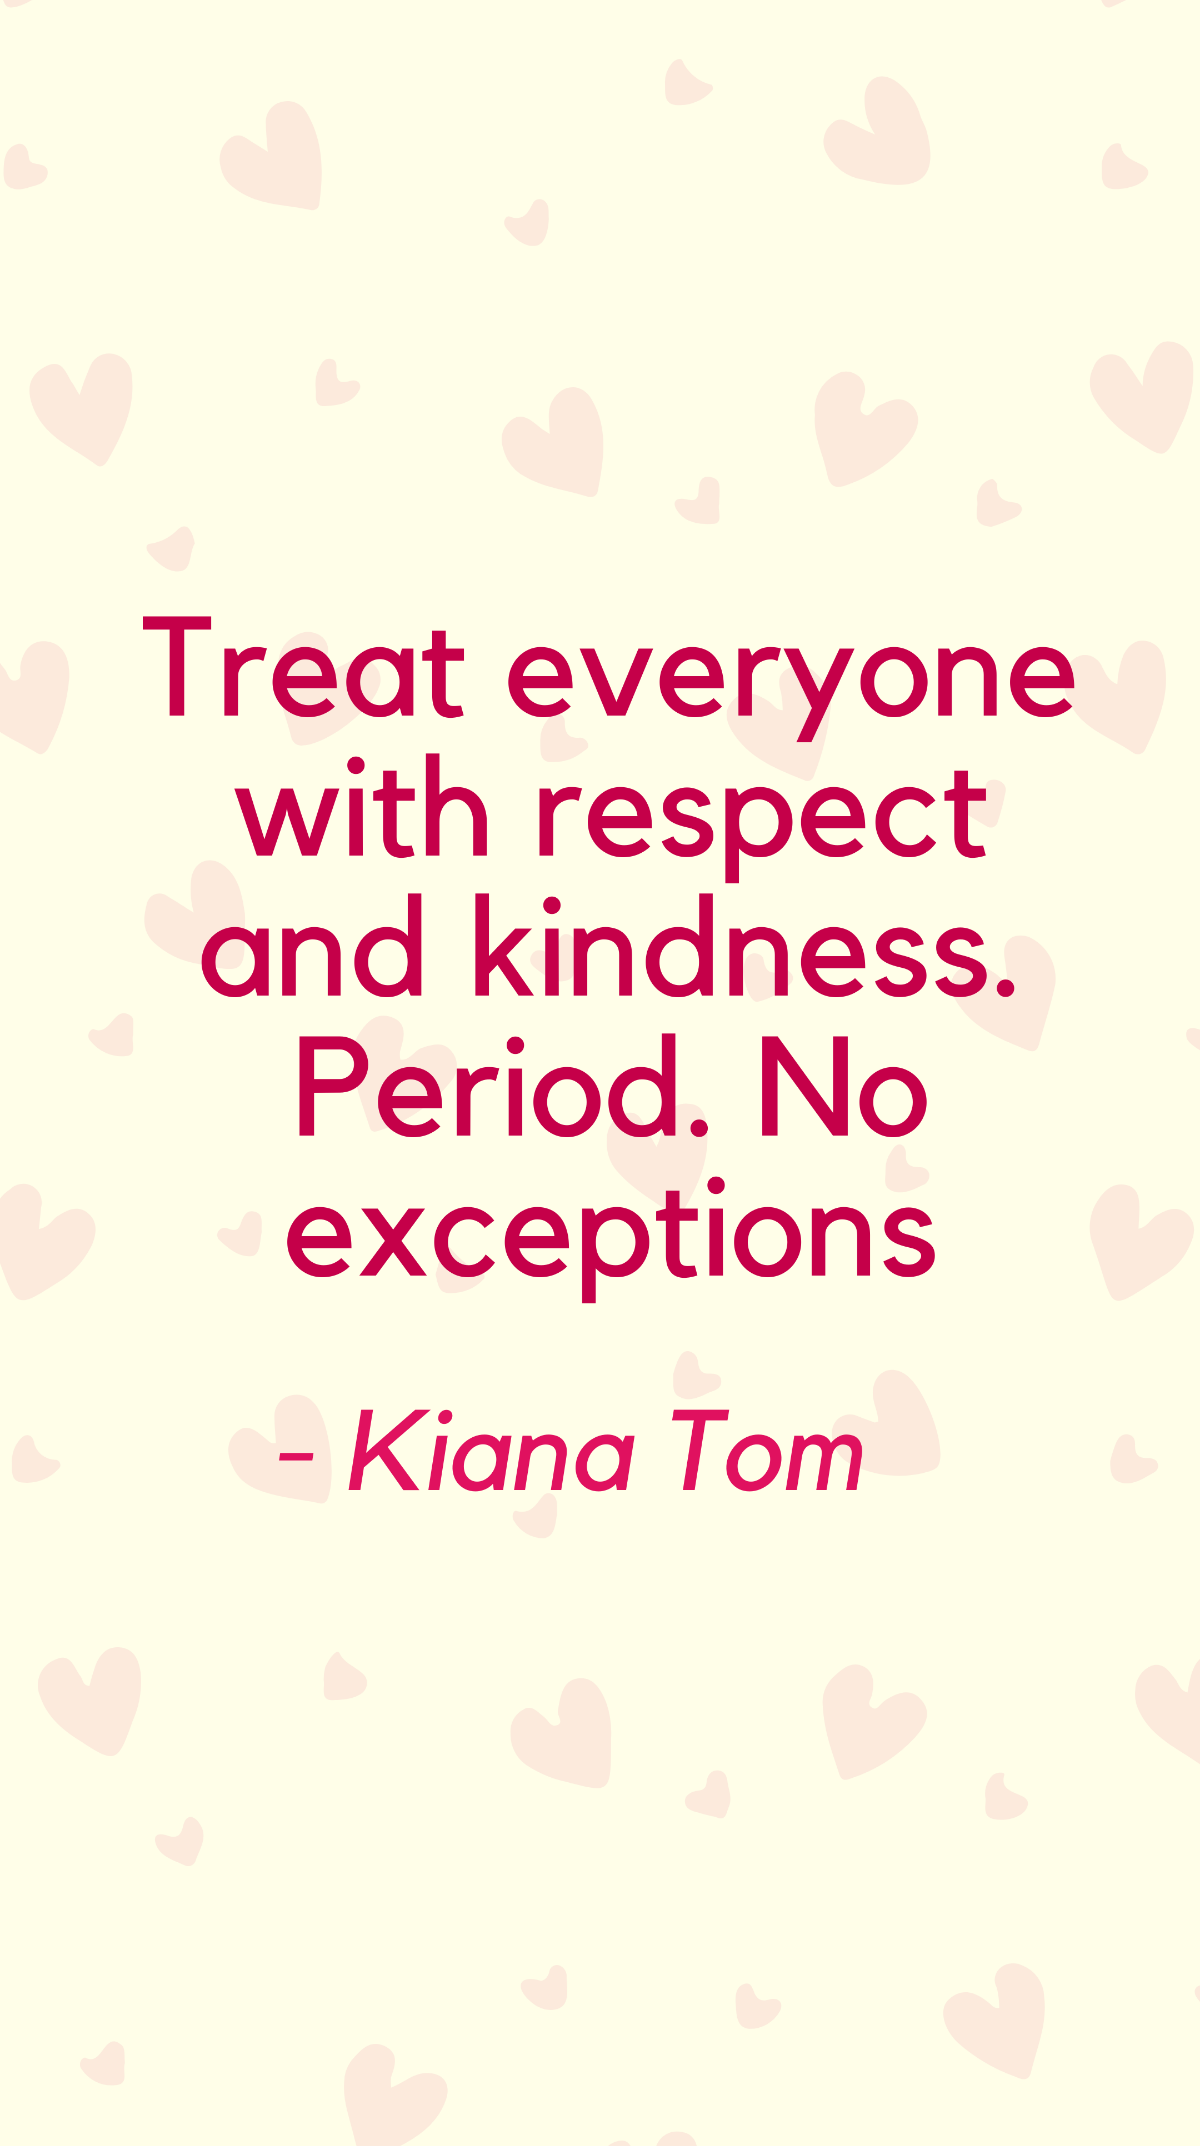 Kiana Tom - Treat everyone with respect and kindness. Period. No exceptions Template